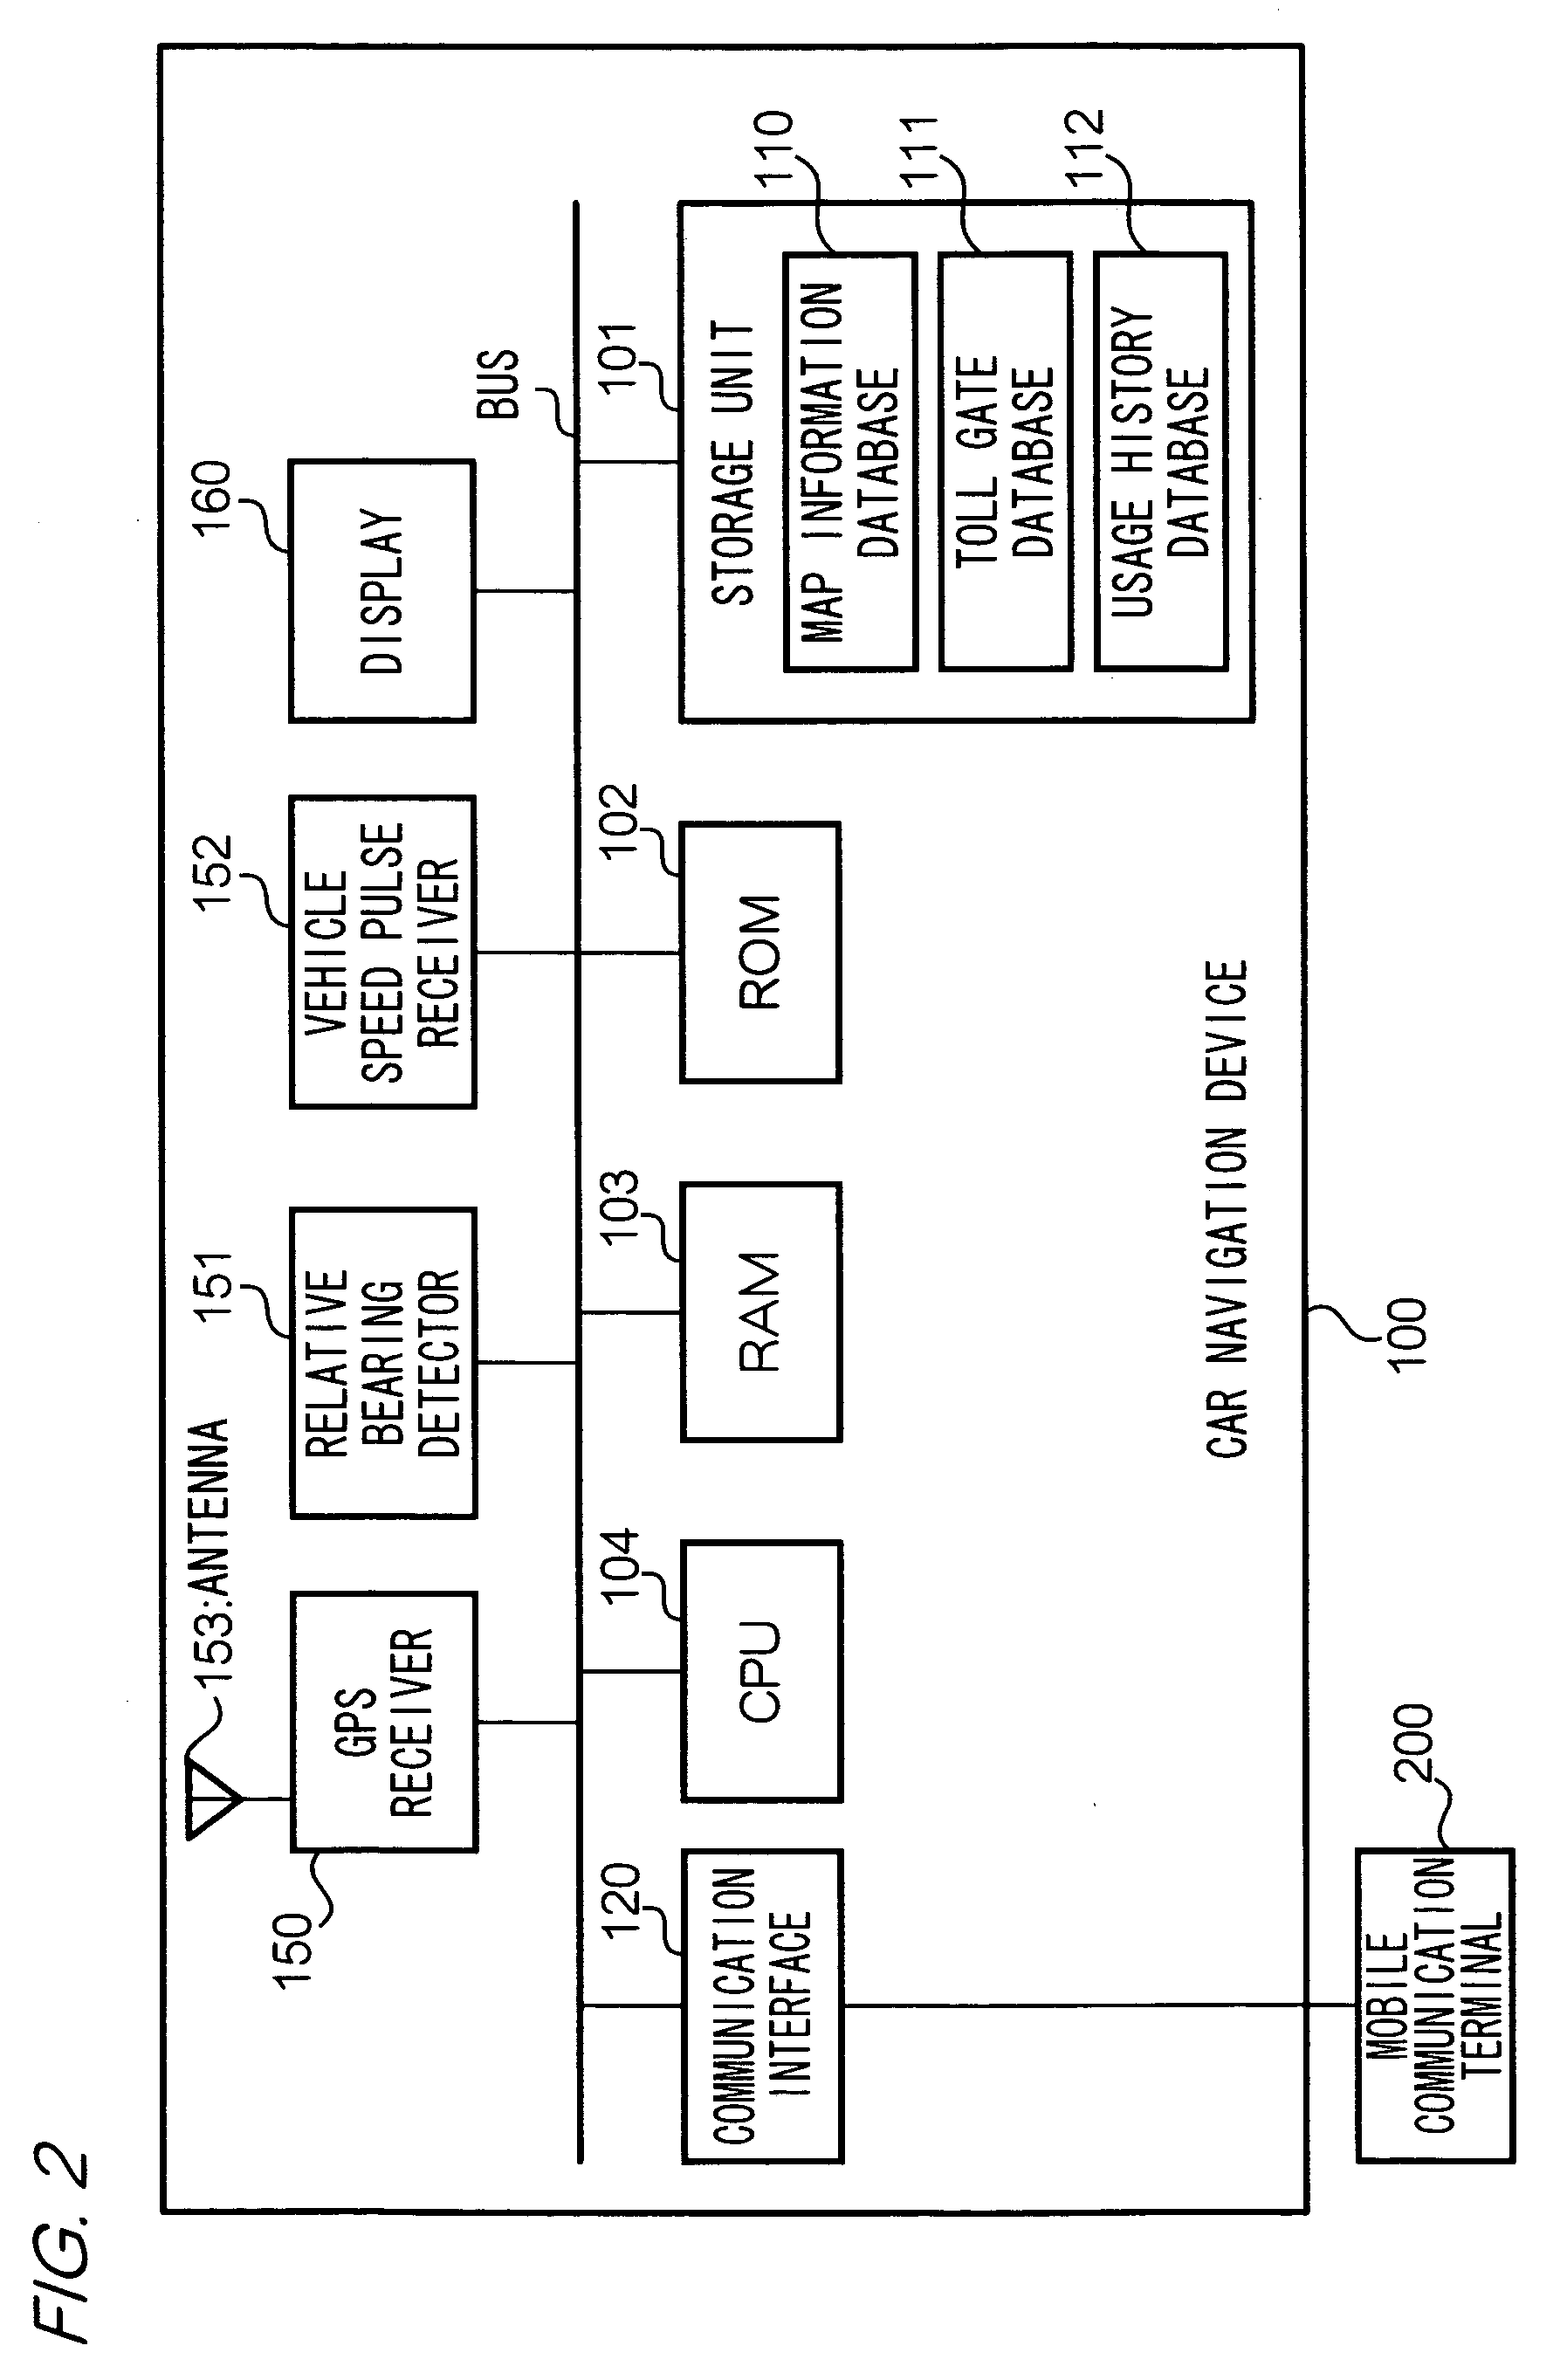 System for notifying toll charge information